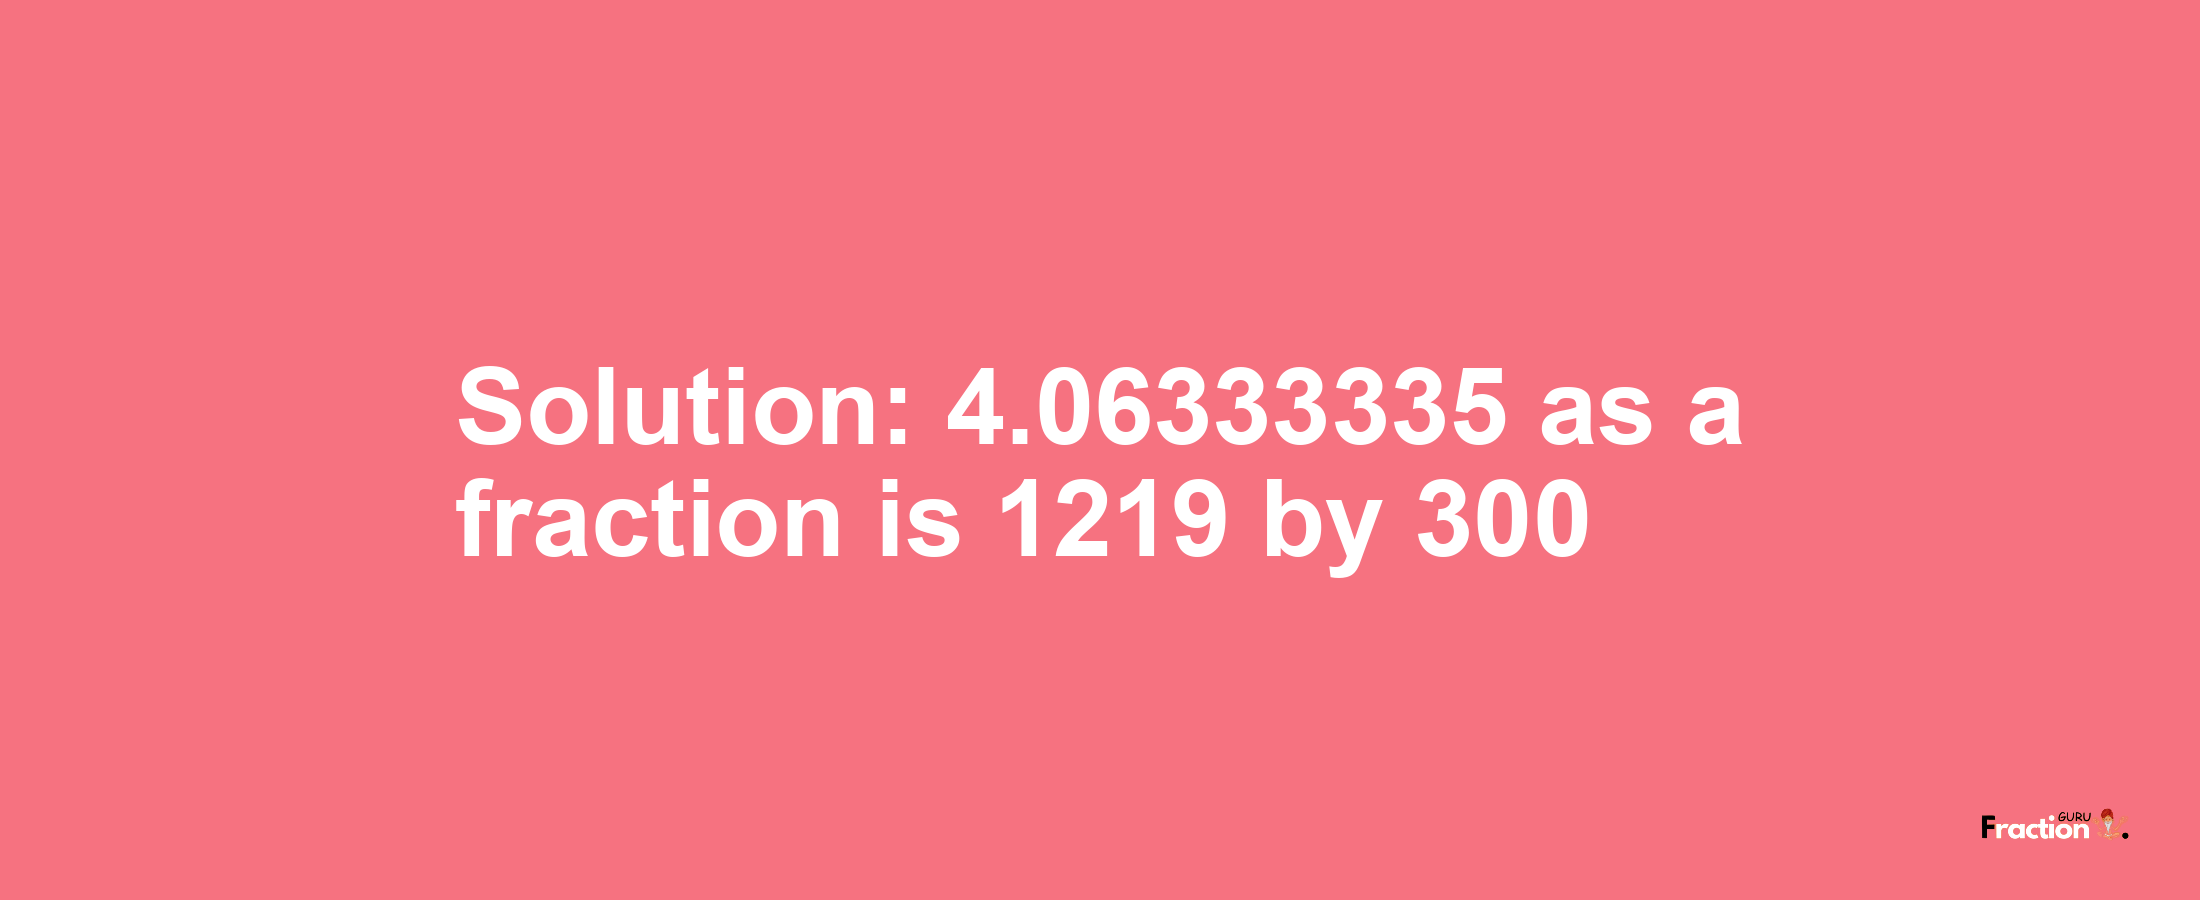 Solution:4.06333335 as a fraction is 1219/300